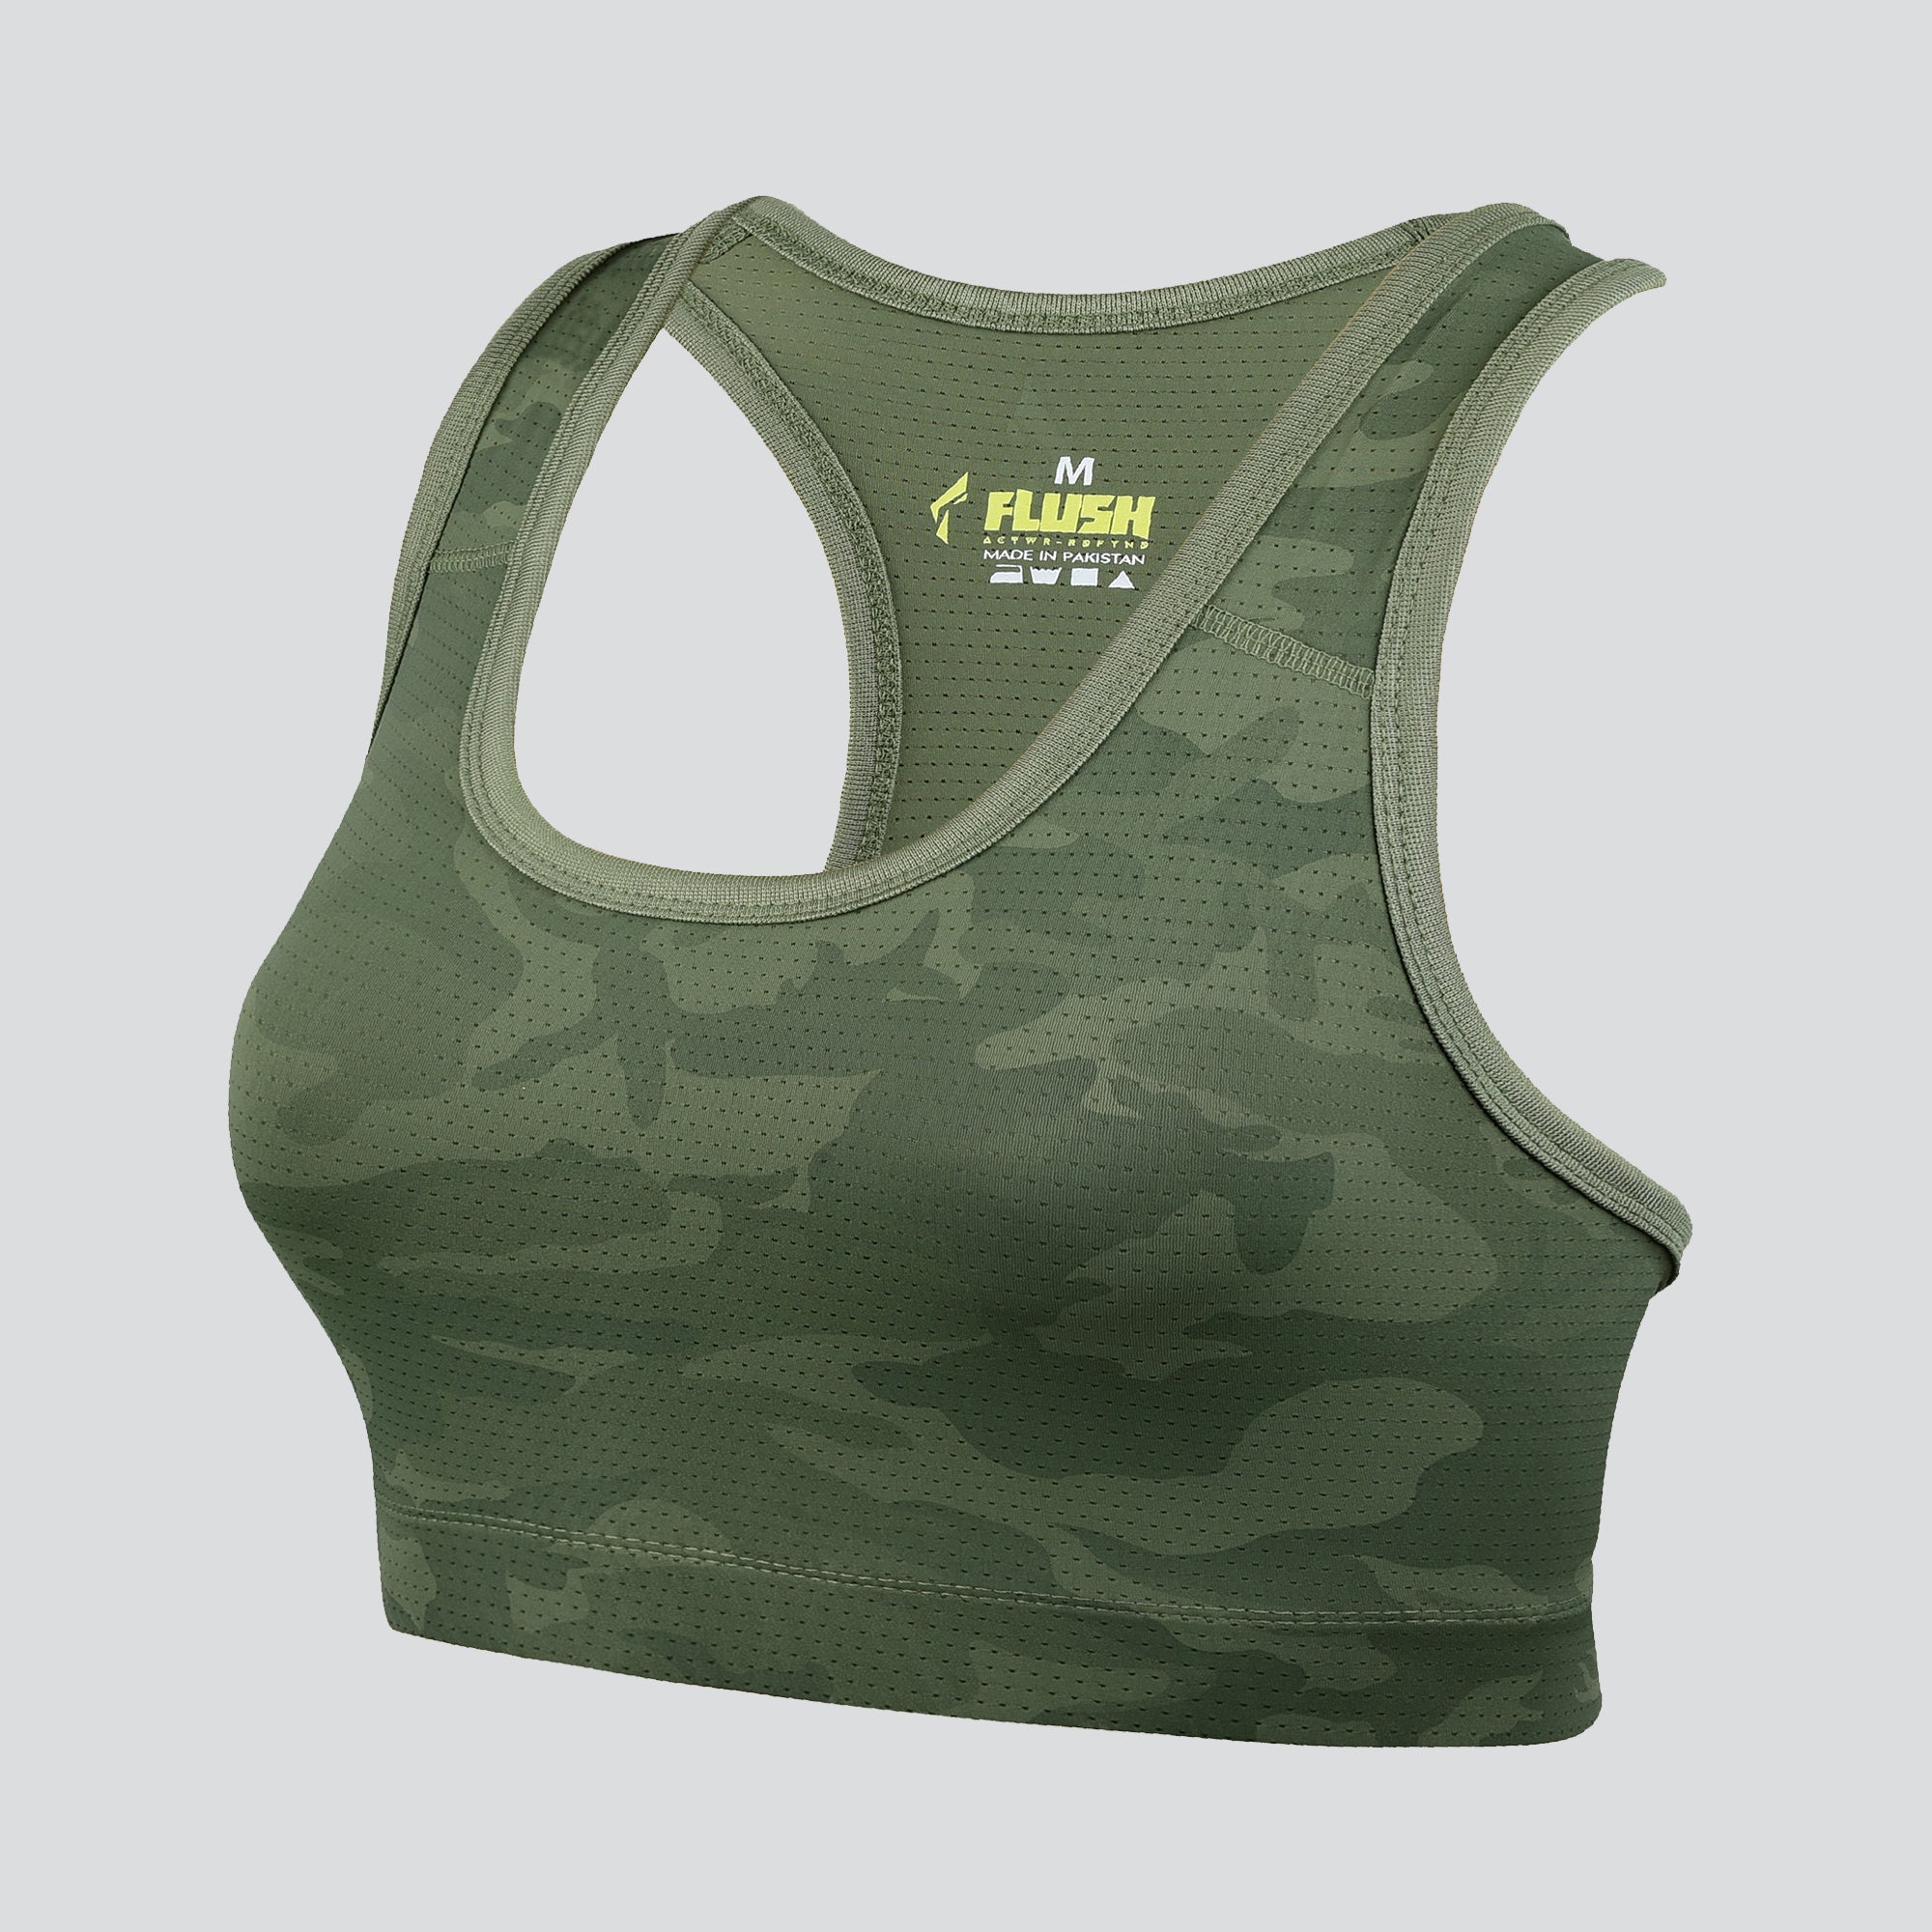 Women's Camo Sports Bra, Support for Yoga Gym - Lime Green